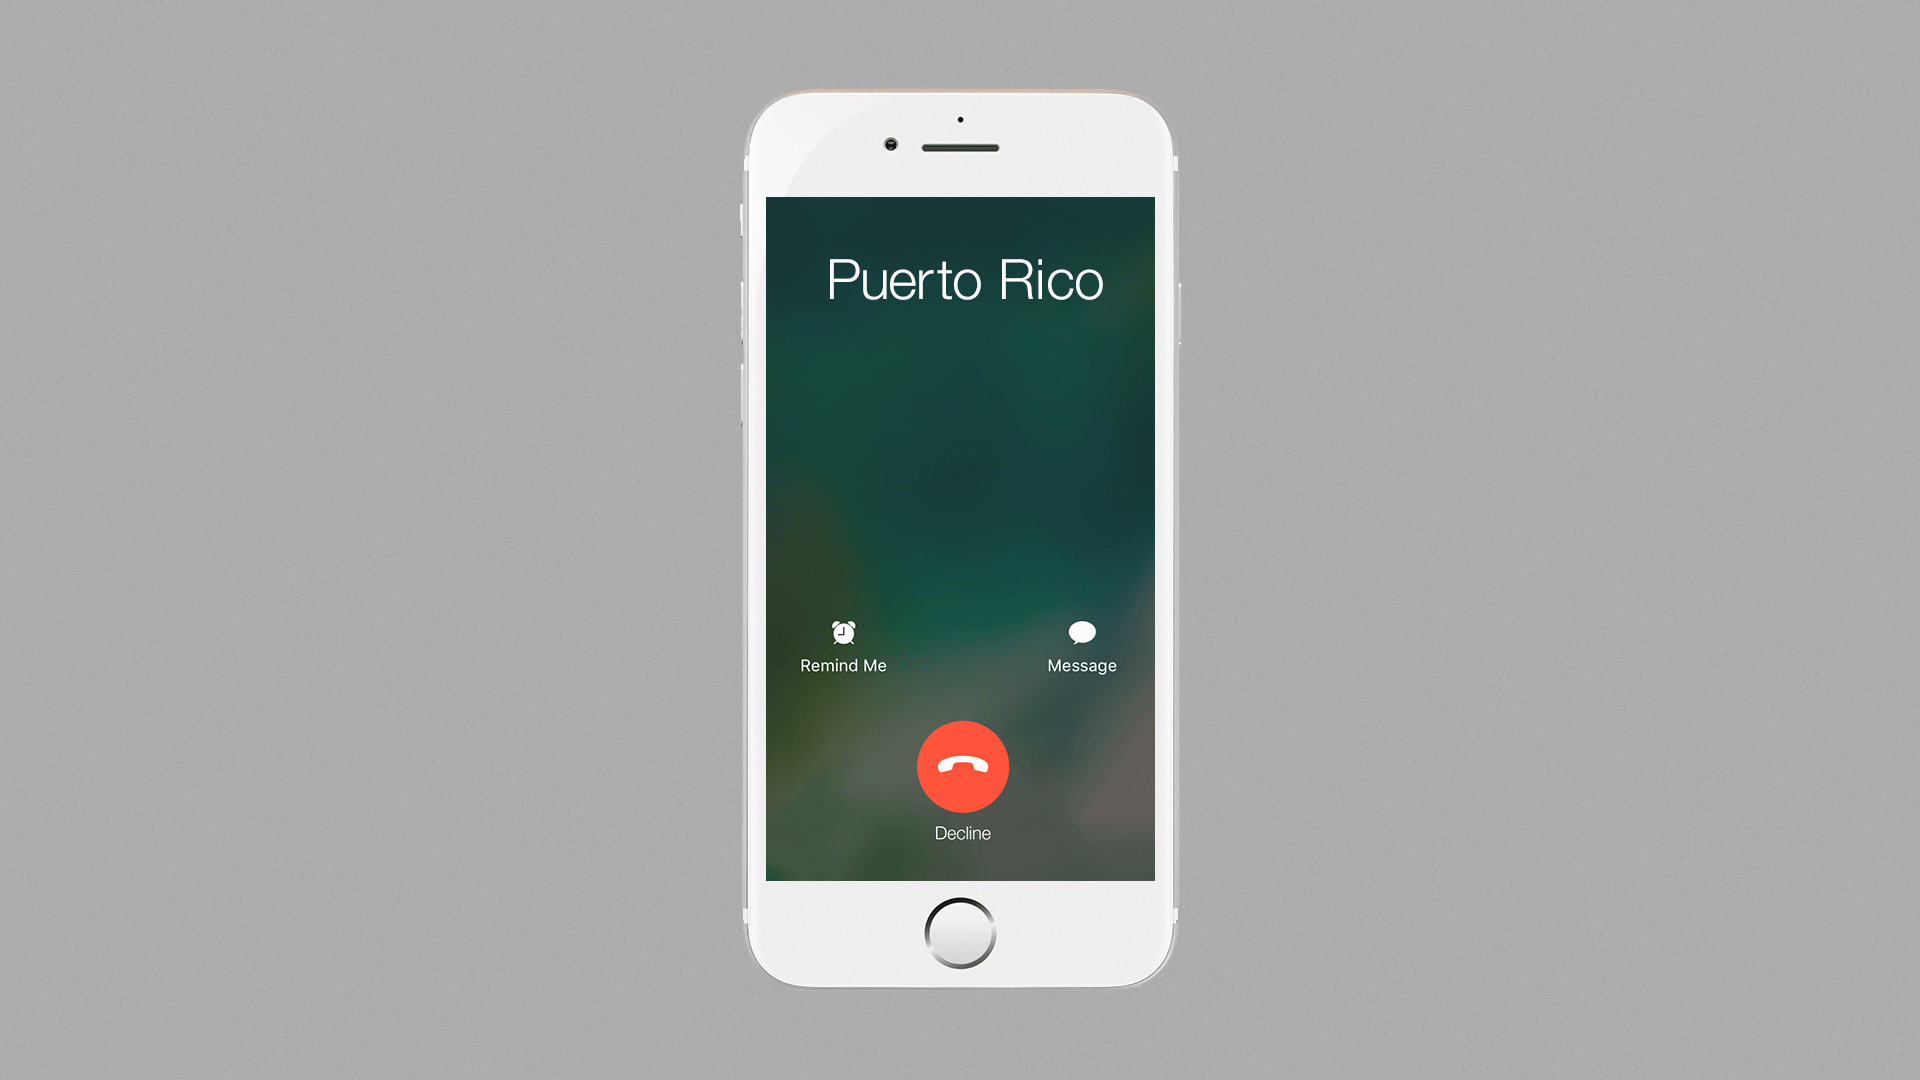 Illustration of an iPhone receiving a call from Puerto Rico, the only option is to decline the call. 